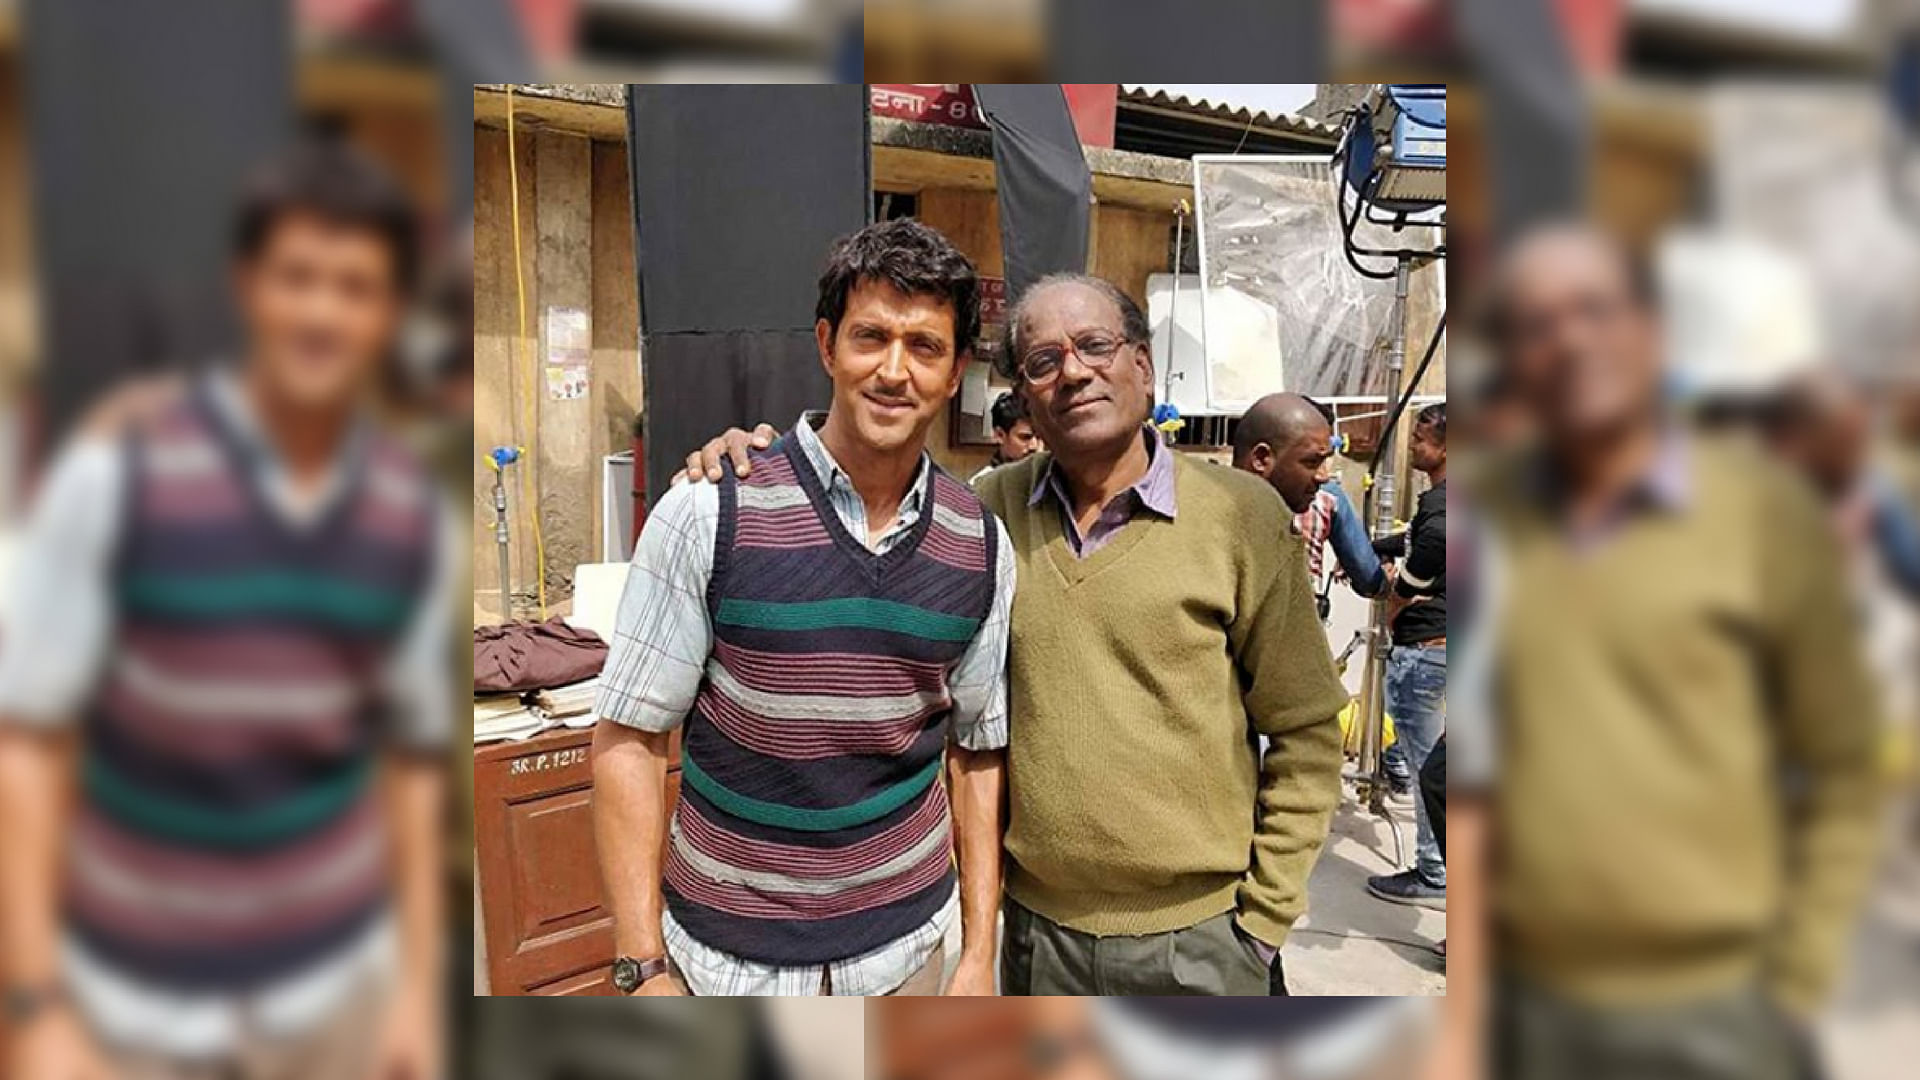 Hrithik Roshan’s unseen photo from the sets of <i>Super 30</i>.